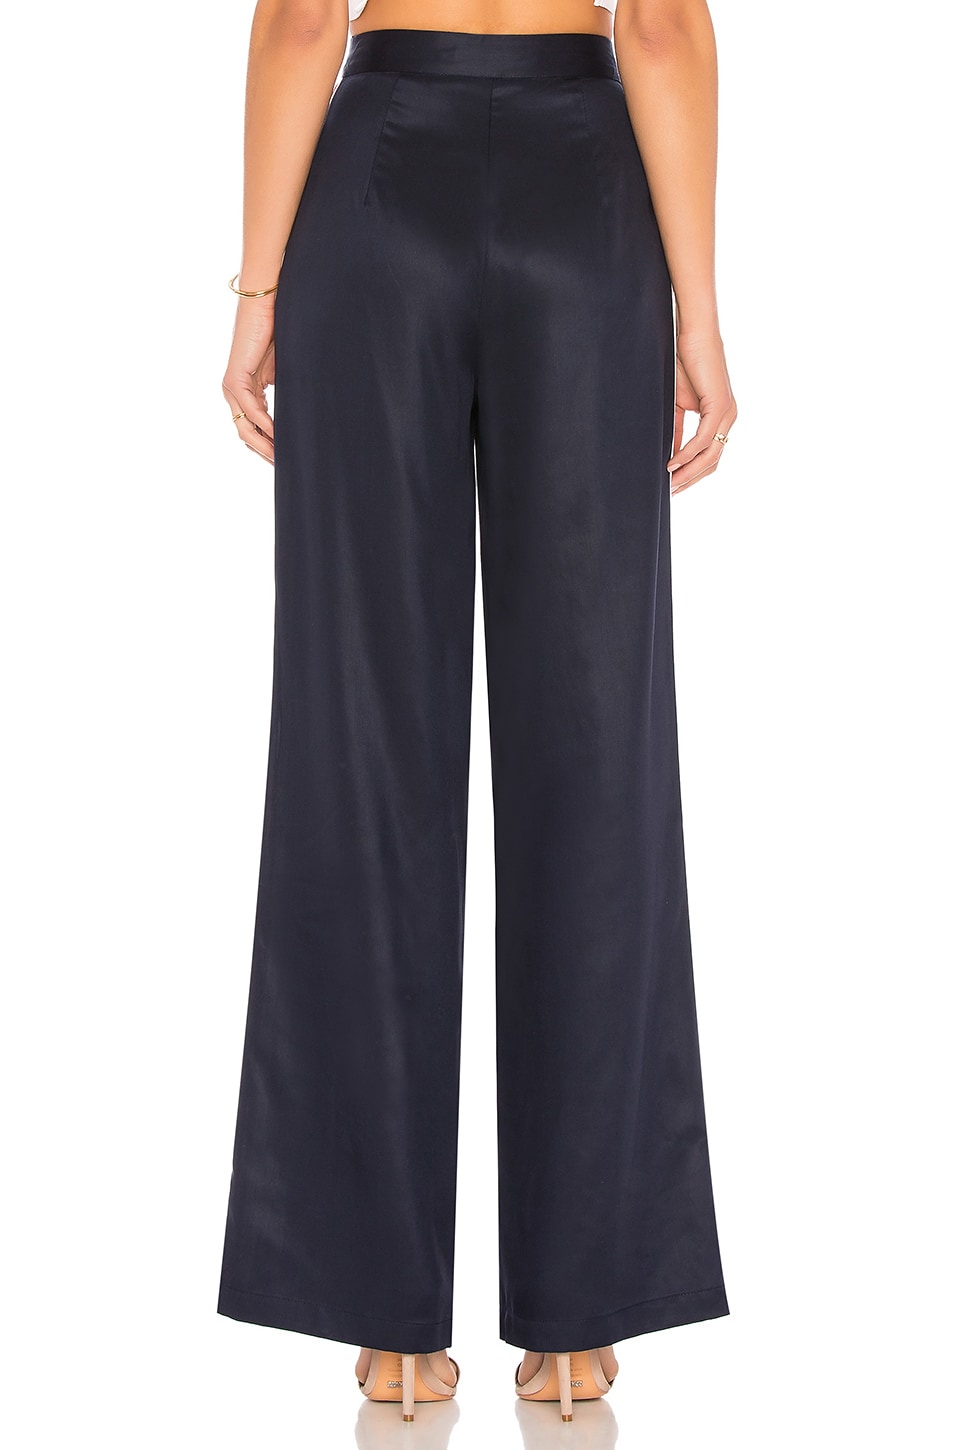 House of Harlow 1960 x REVOLVE Wide Leg Track Pants in Navy Combo | REVOLVE